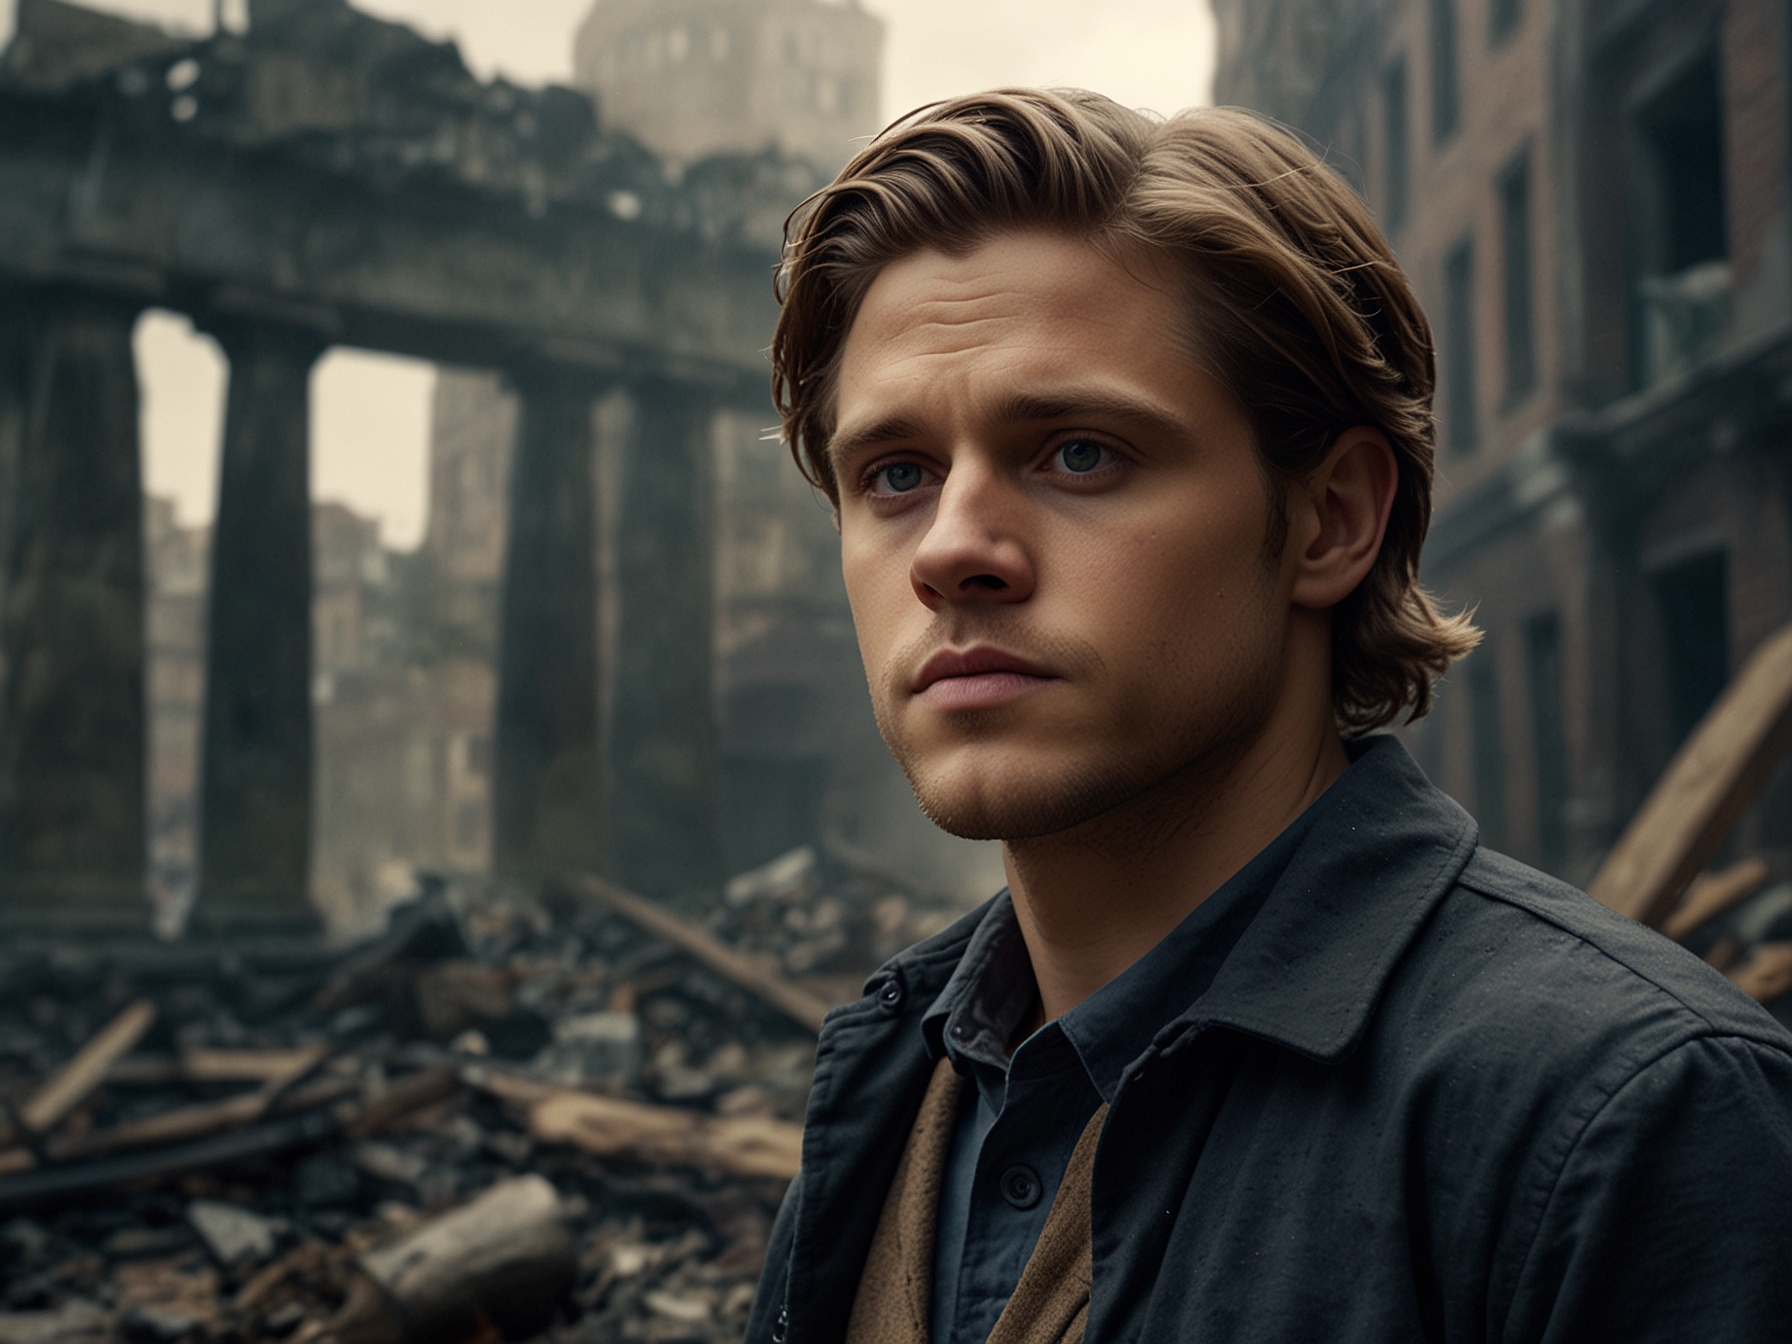 A mysterious global catastrophe leaves Earth changed; Isherwood 'Ish' Williams, portrayed by Aaron Tveit, navigates through rubble and ruins, reflecting on civilization and nature's fragility.